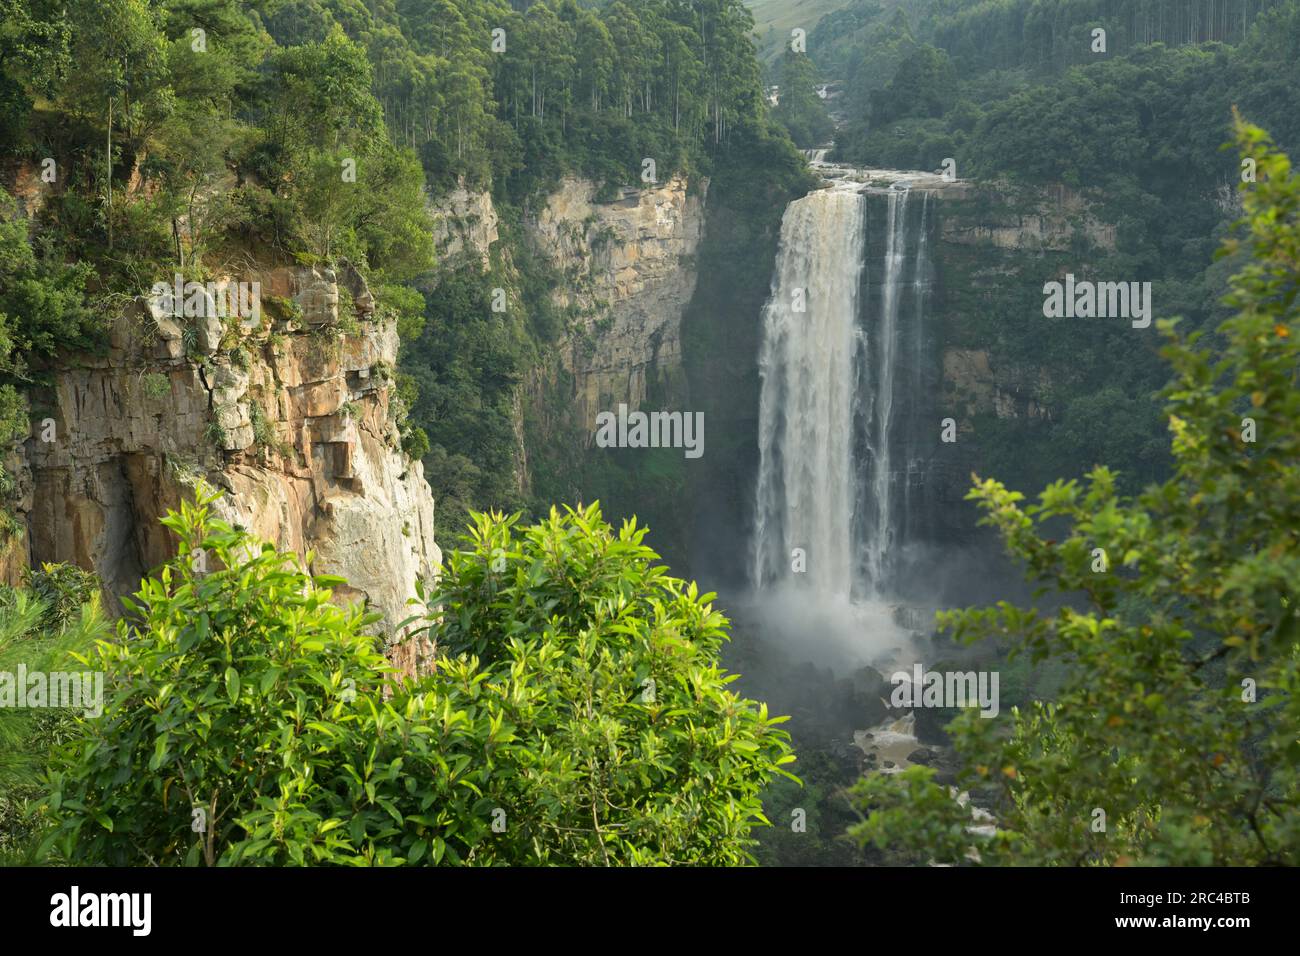 Beautiful landscape, Karkloof waterfall, Howick, KwaZulu-Natal, South Africa, water flowing over cliff, scenic African nature, travel attraction Stock Photo